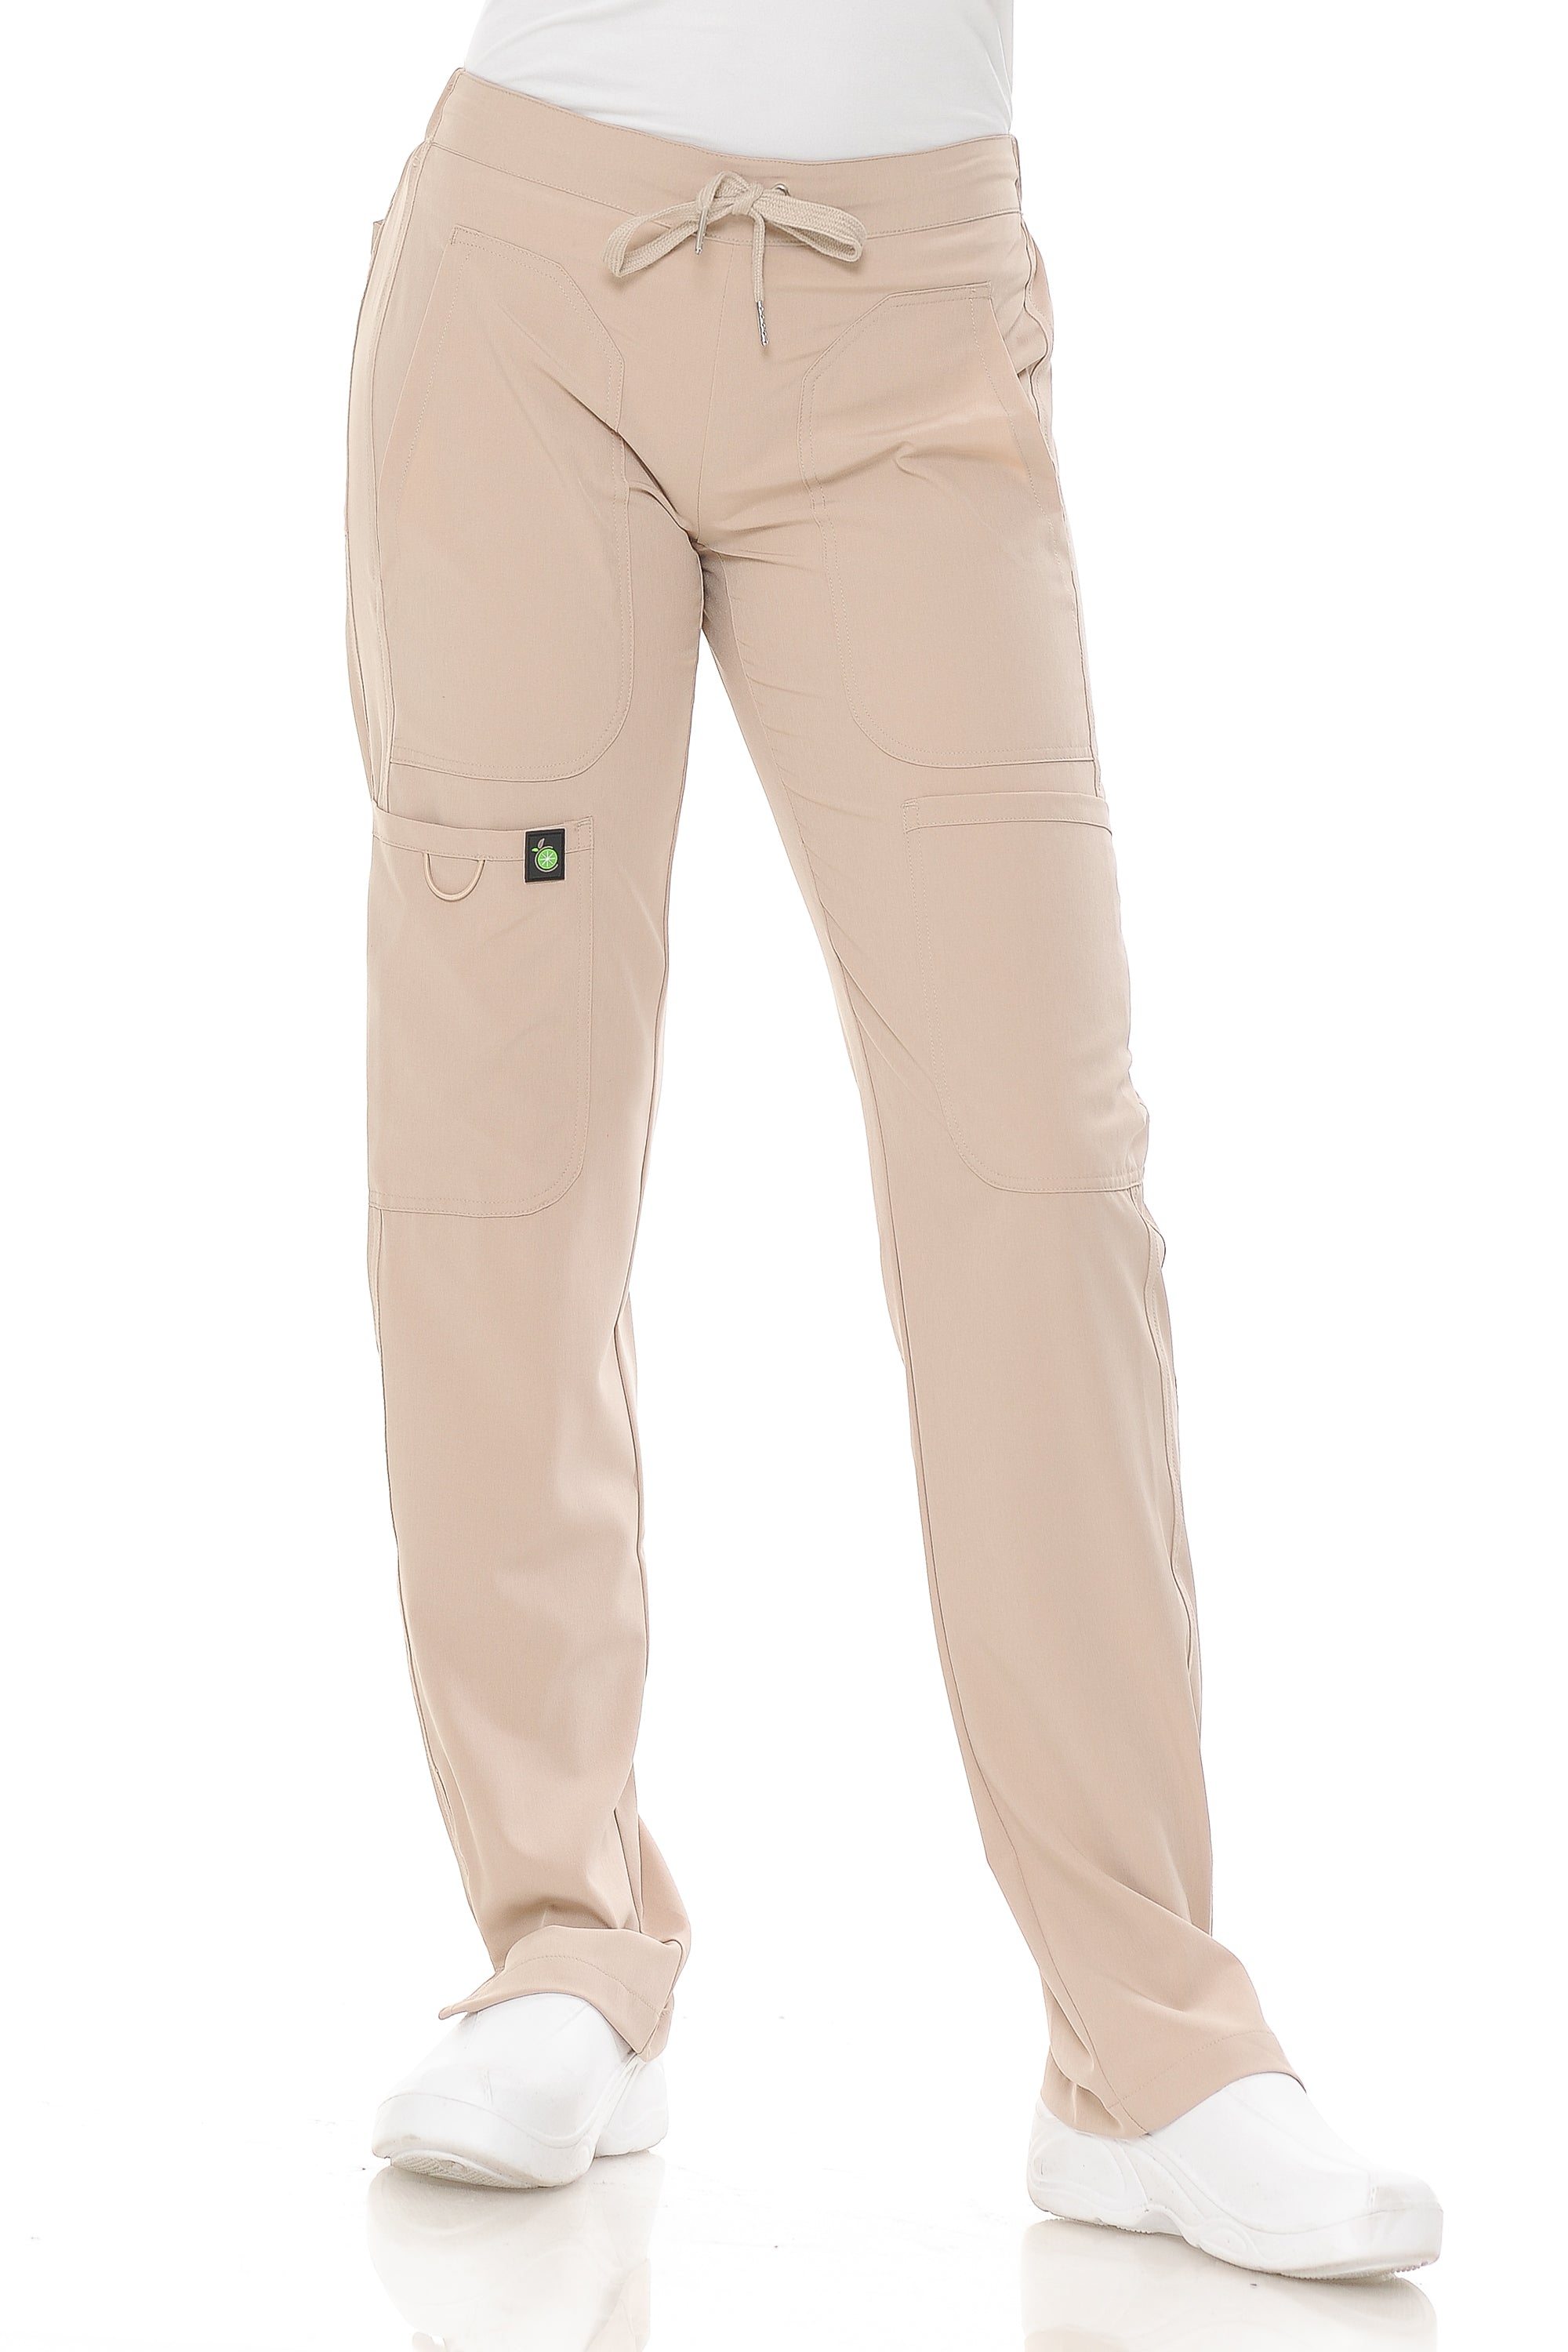 NAME IT REGULAR FITTED CARGO PANTS - 13151735 - kidslimi ...